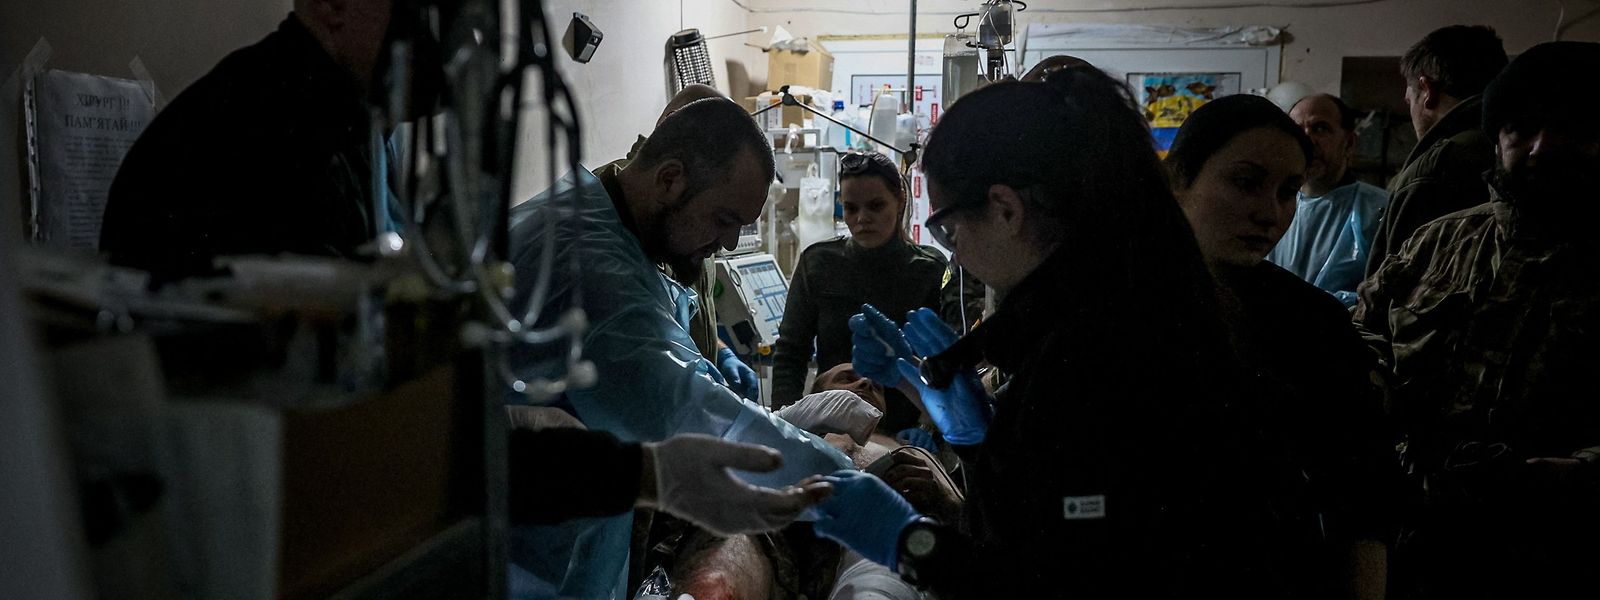 TOPSHOT - A wounded Ukrainian soldier receives treatment at a stabilising mobile hospital in the vicinity of Bakhmut, Donetsk region, on December 3, 2022, amid the Russian invasion of Ukraine. (Photo by ANATOLII STEPANOV / AFP)